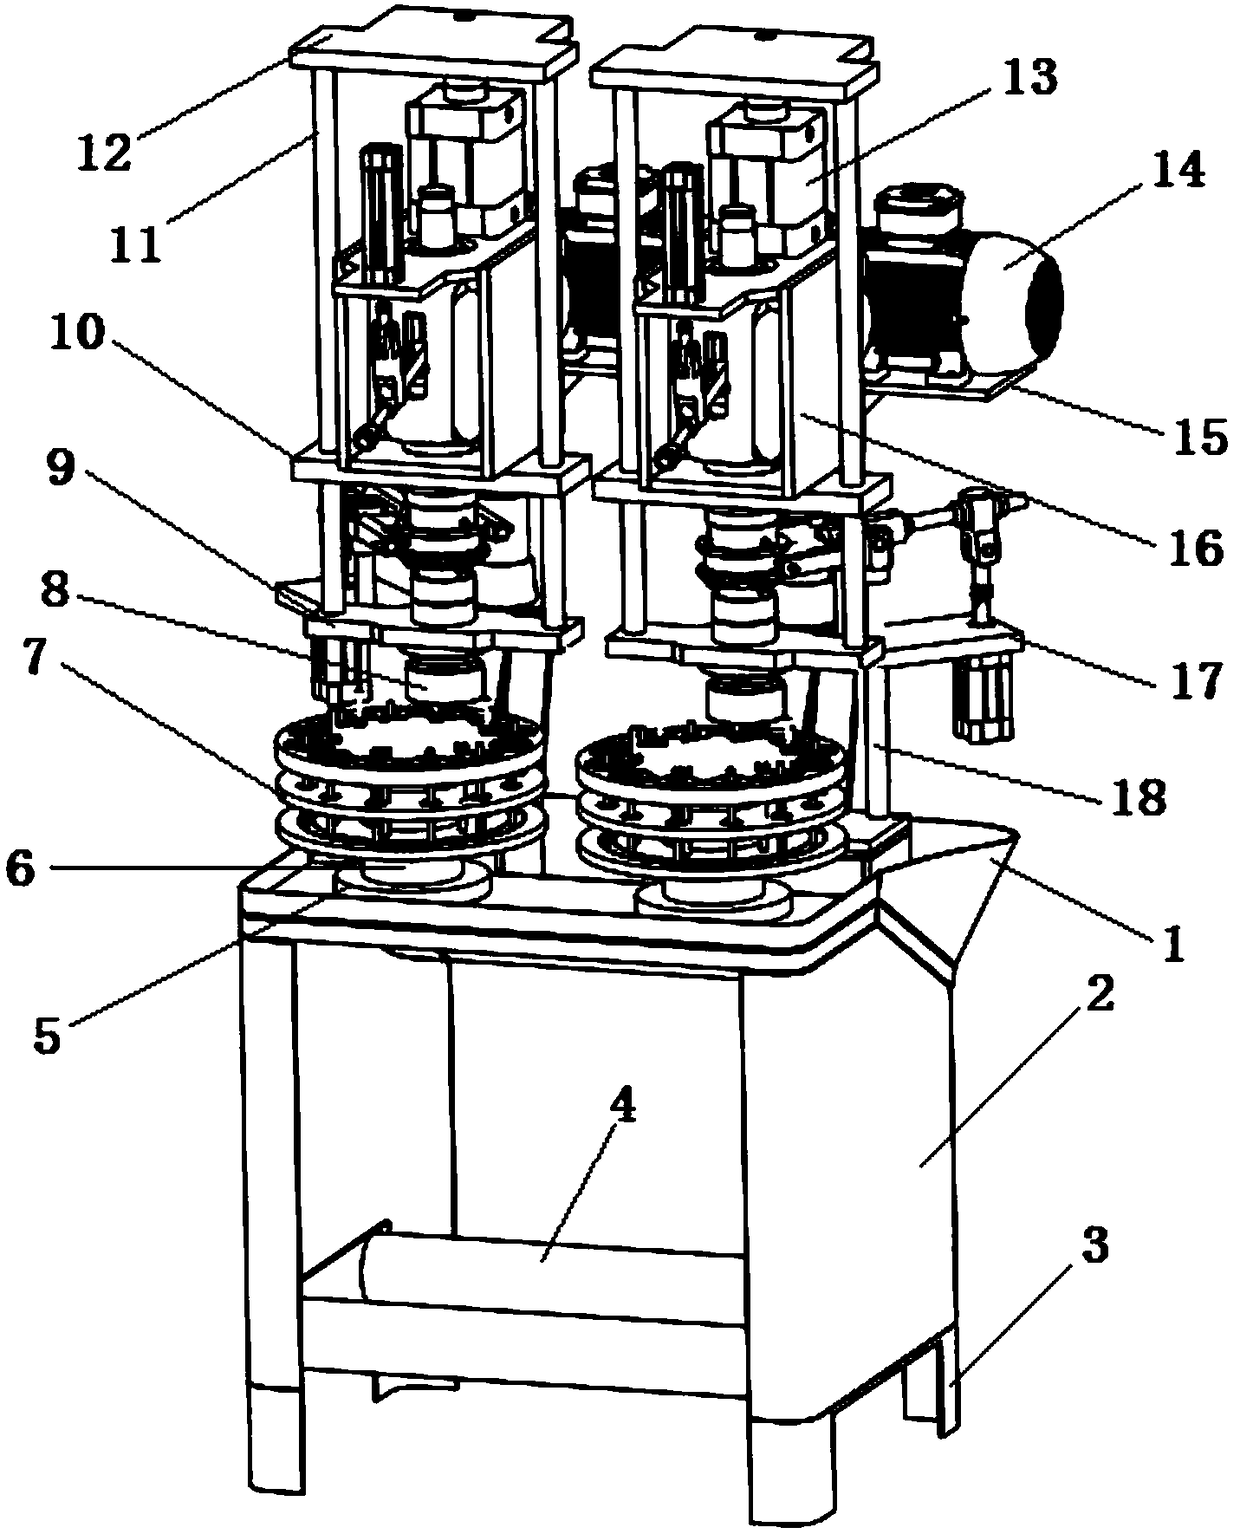 An automatic drilling machine with double turntables and double drill stands